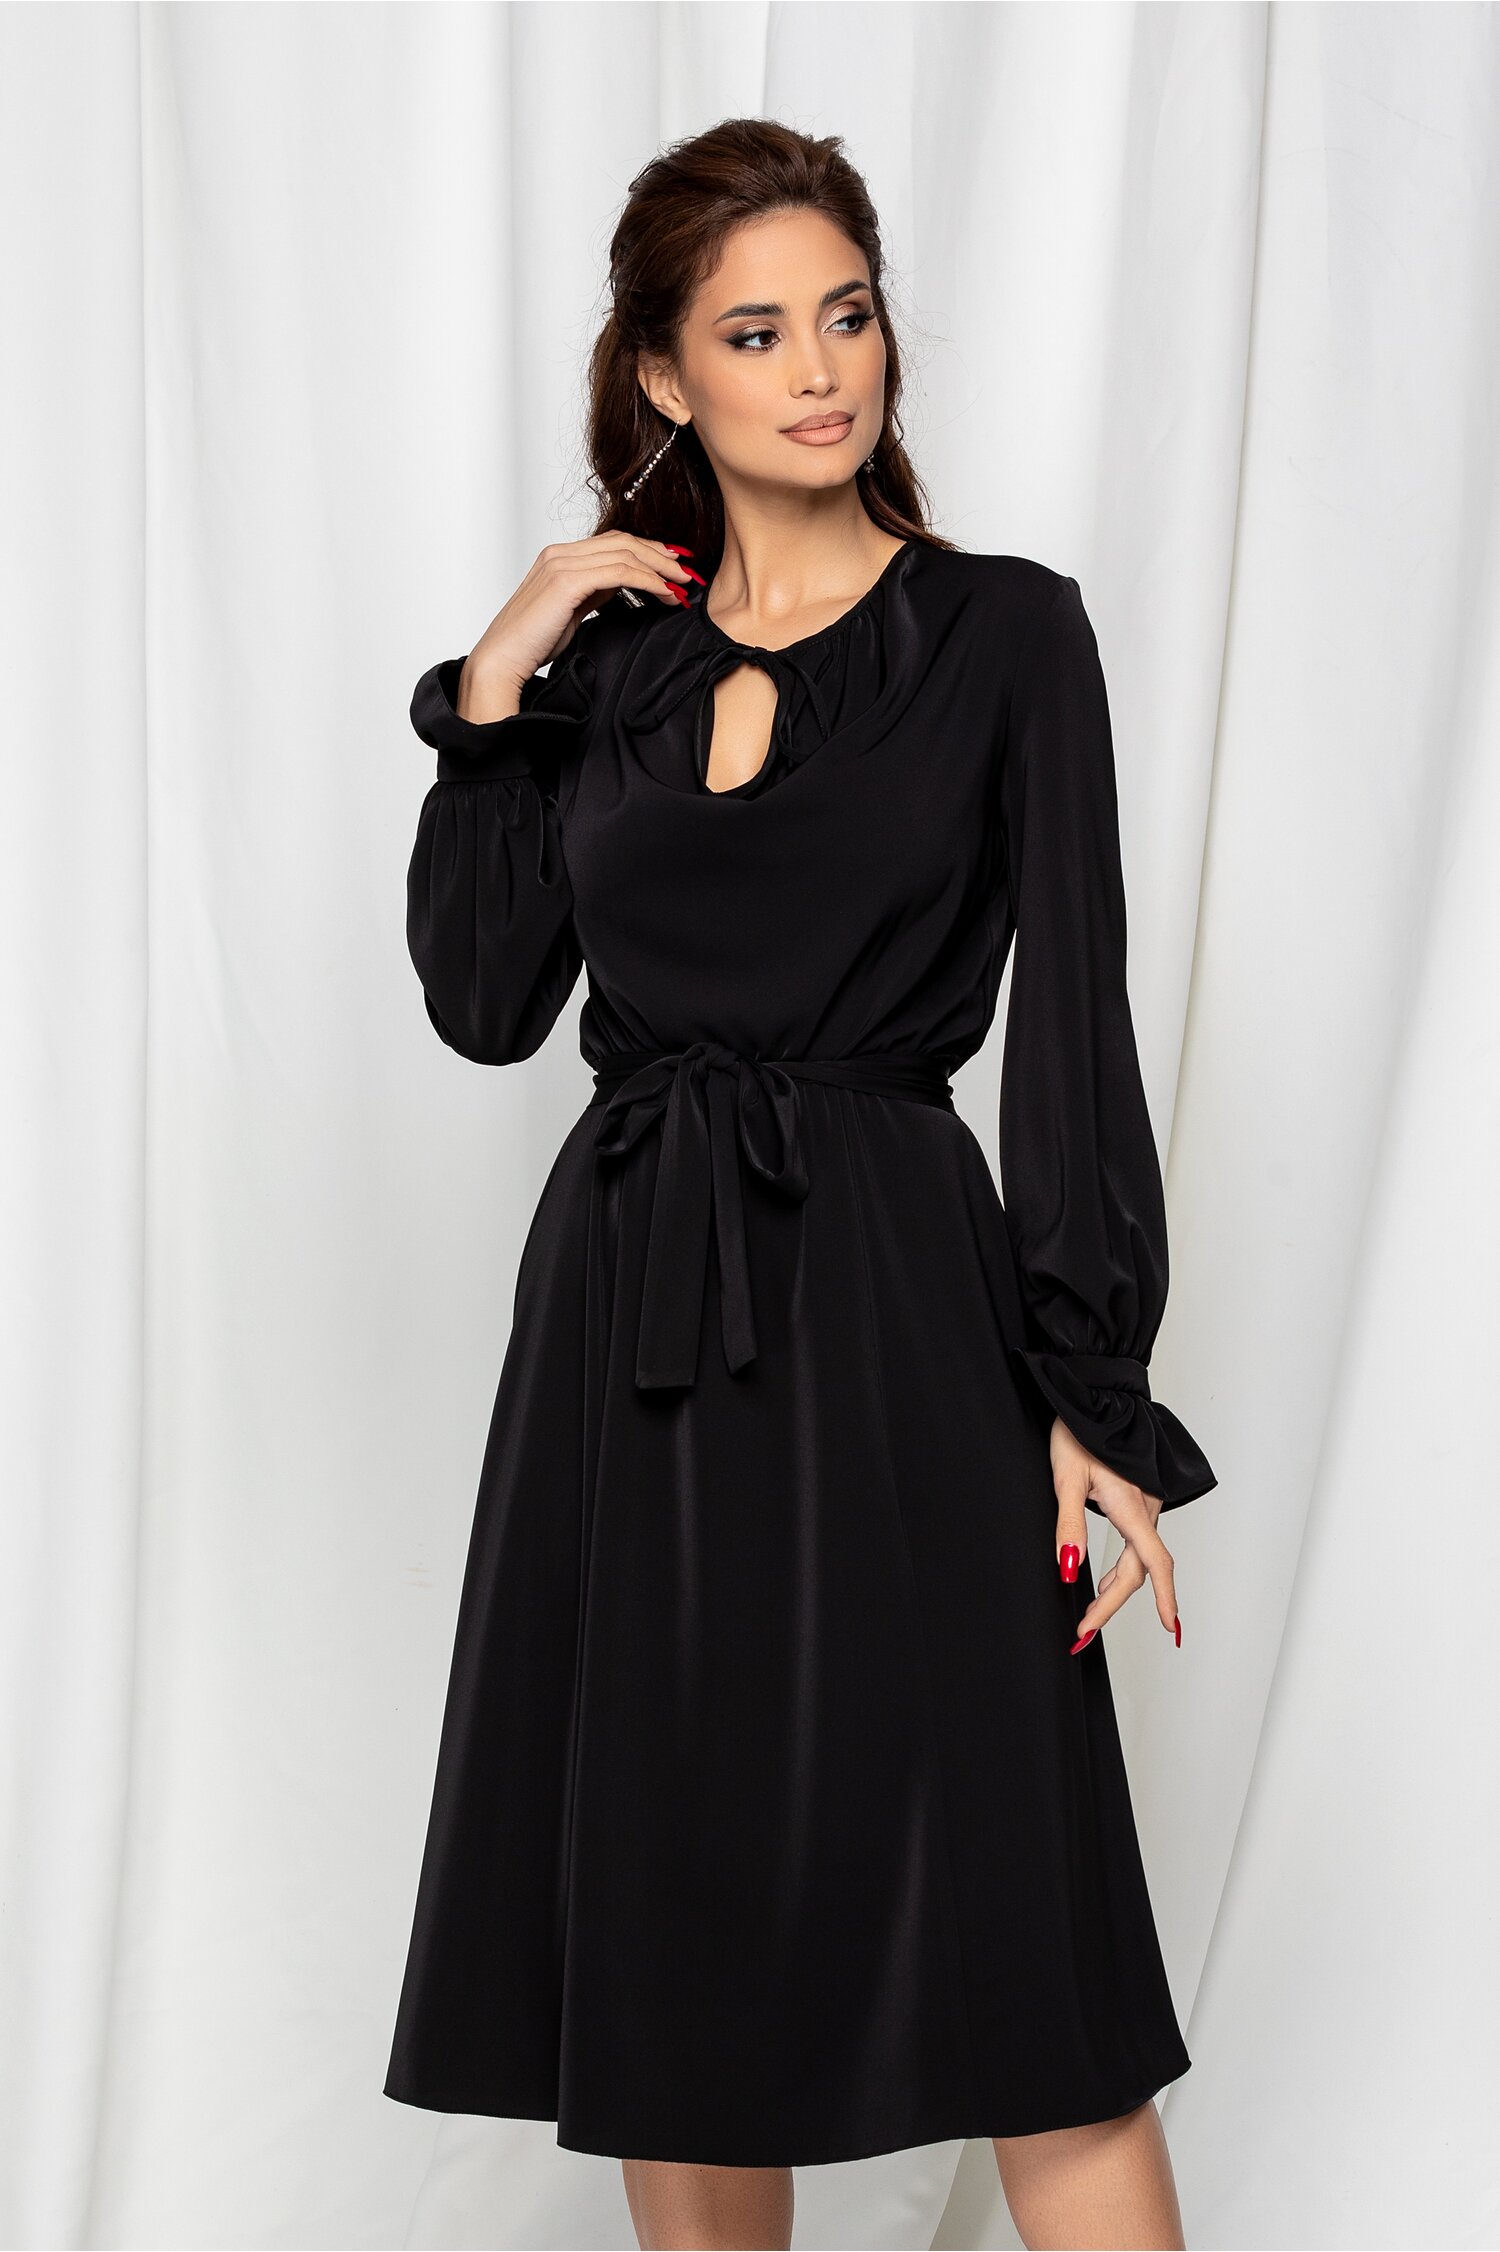 out of service Measurable sit Rochie Dy Fashion neagra cu cordon in talie - fhsboutique.ro